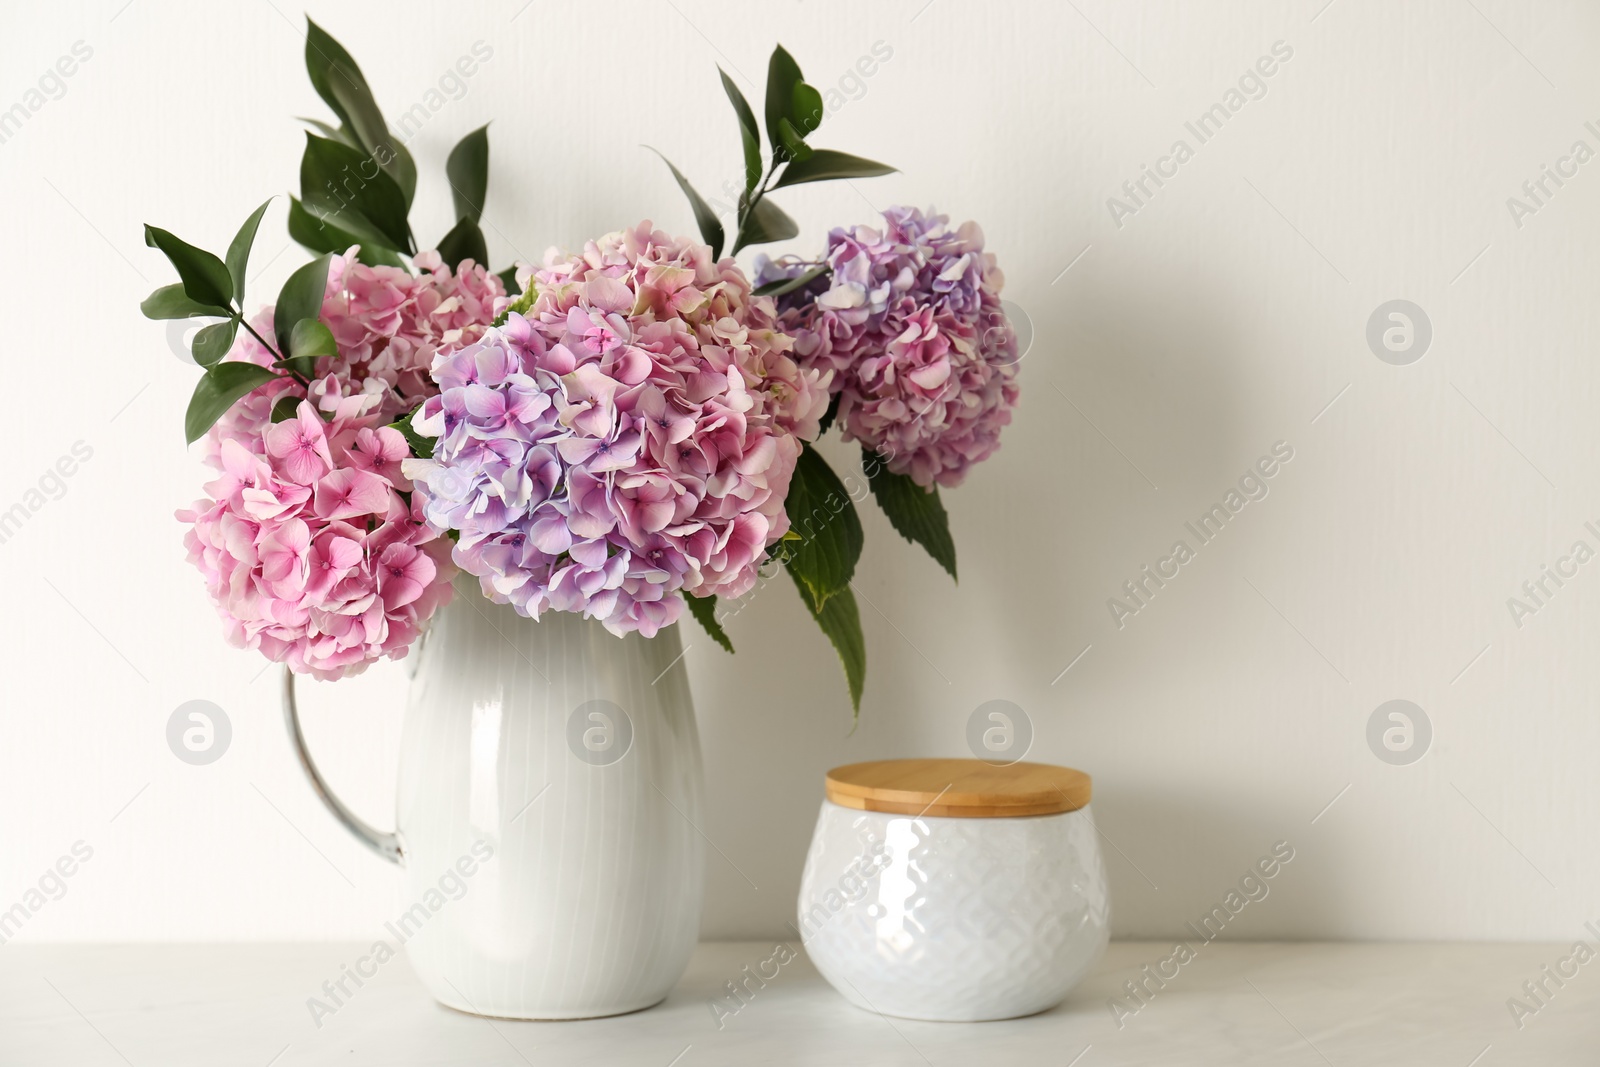 Photo of Bouquet with beautiful purple hydrangea flowers and jar on light countertop